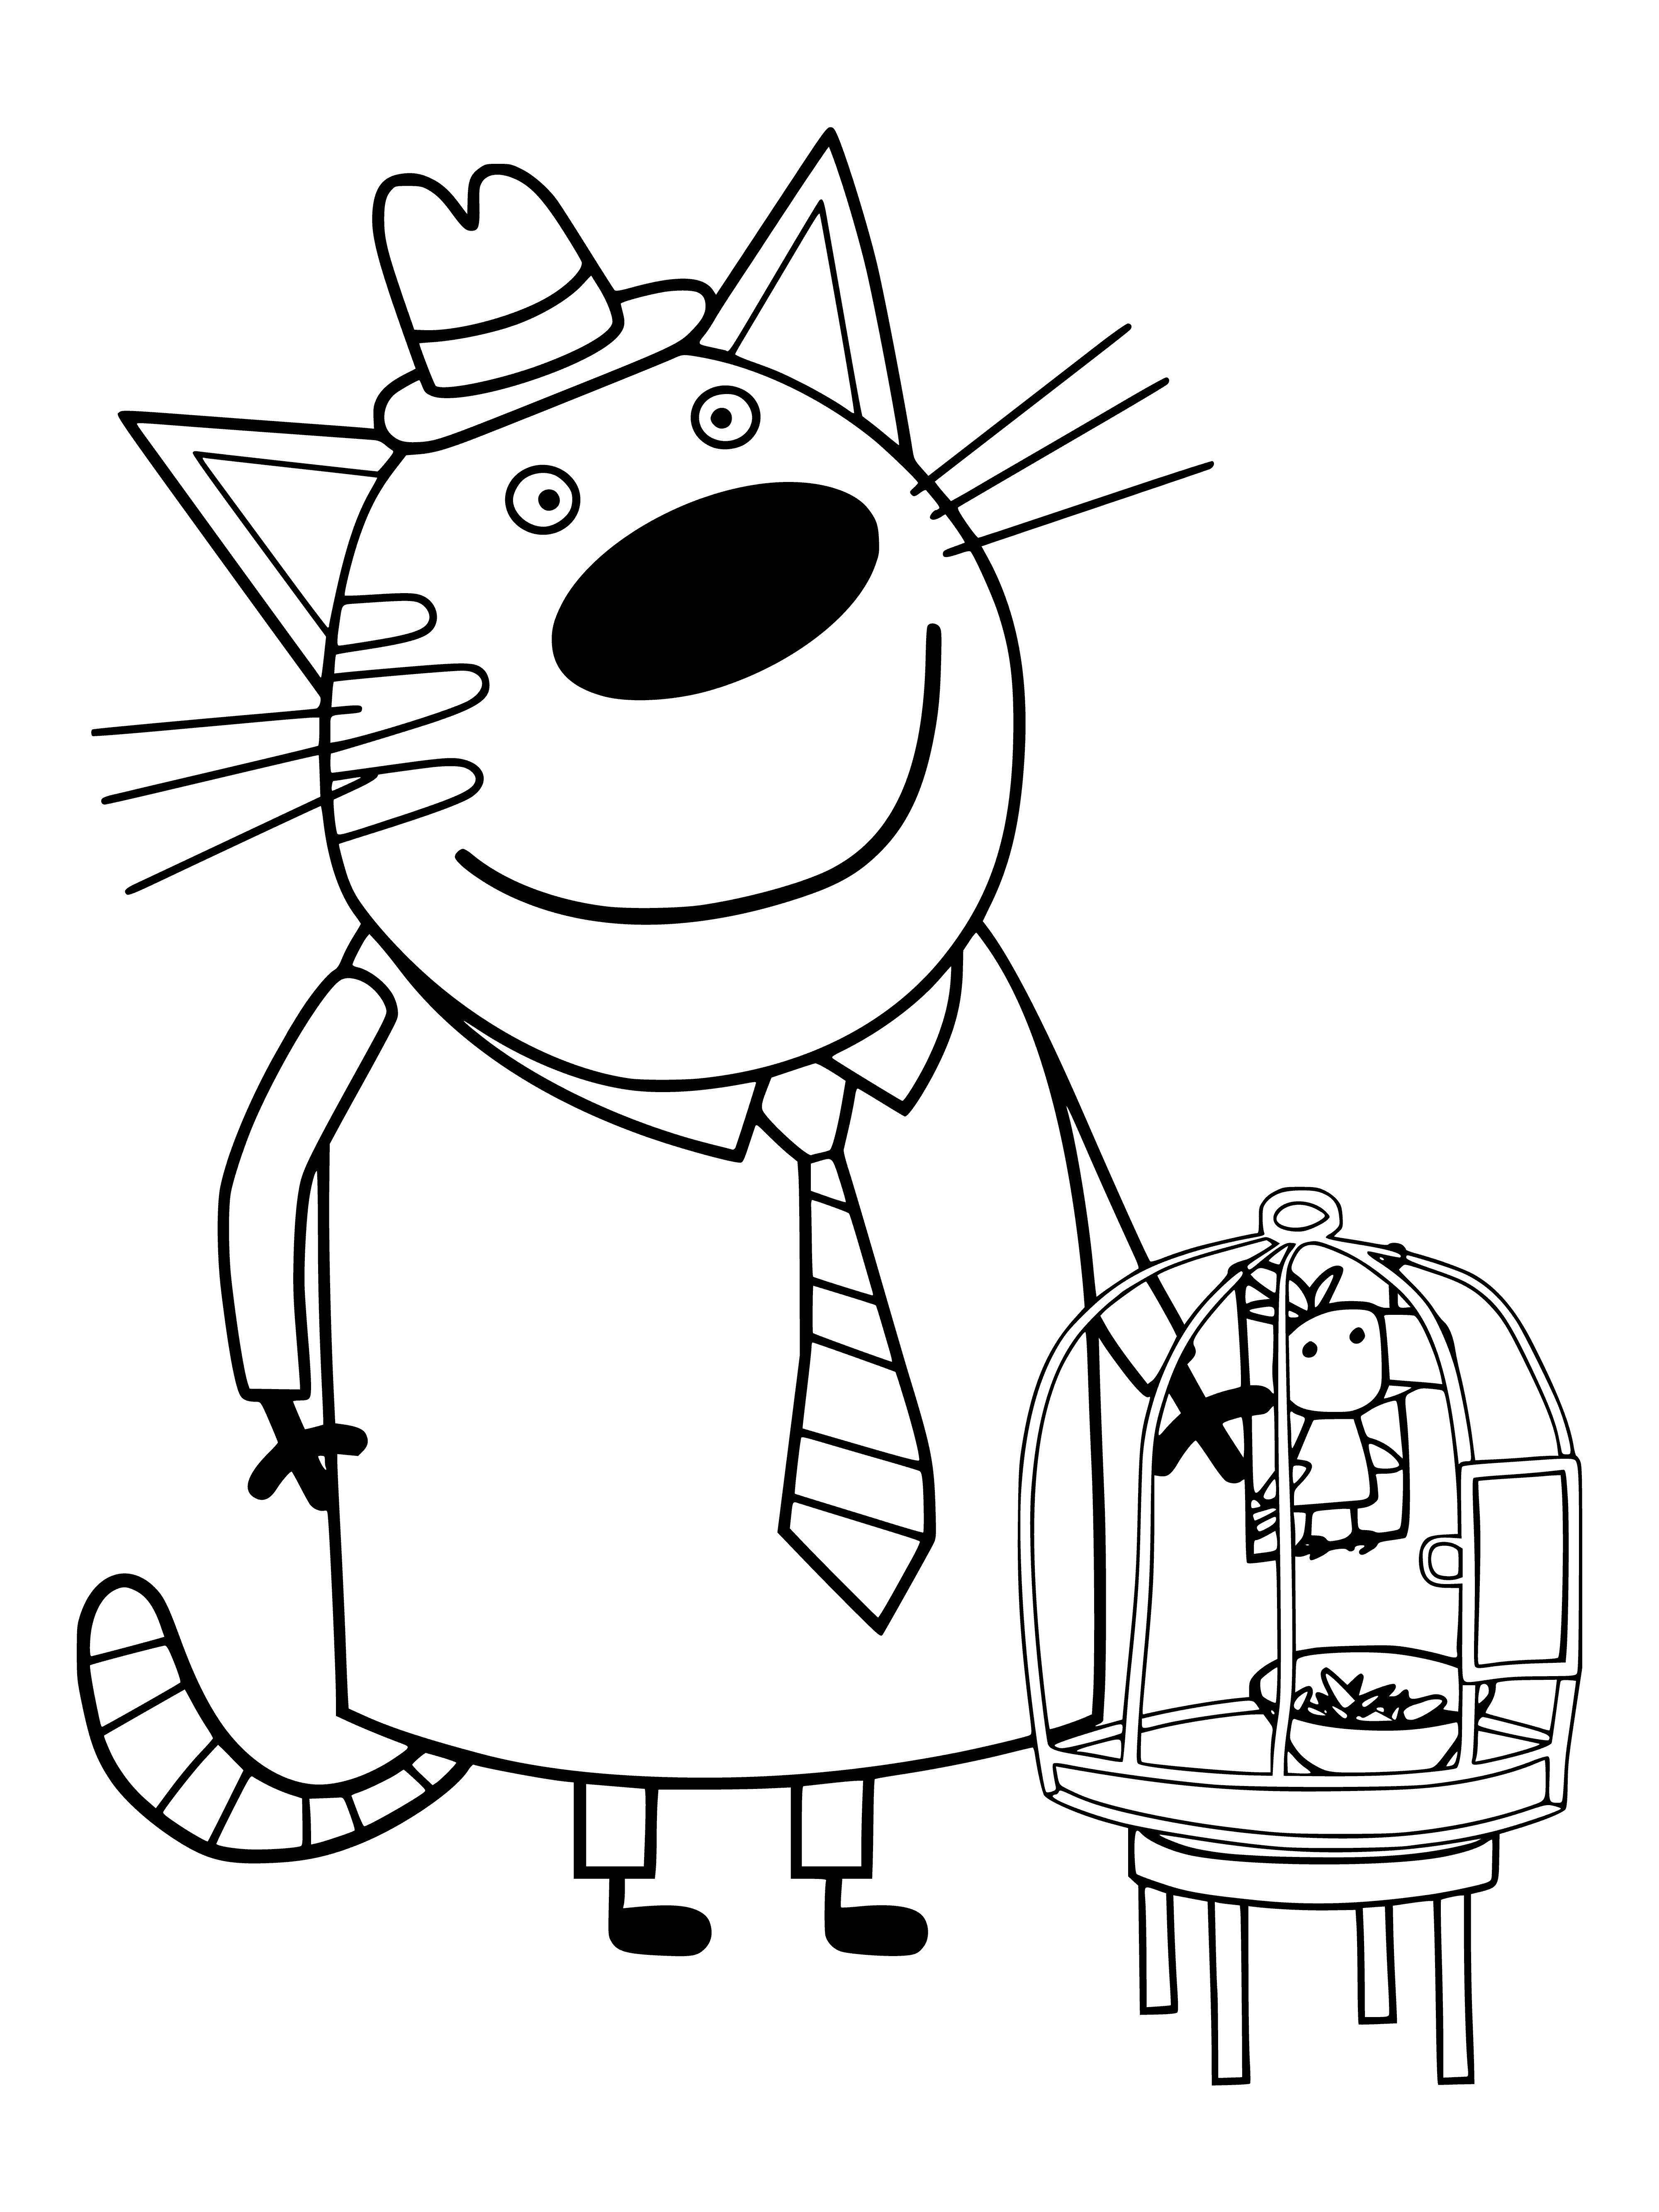 coloring page: 3 cats: an orange one turned away & 2 smaller b&w cats looking up - all on a coloring page.